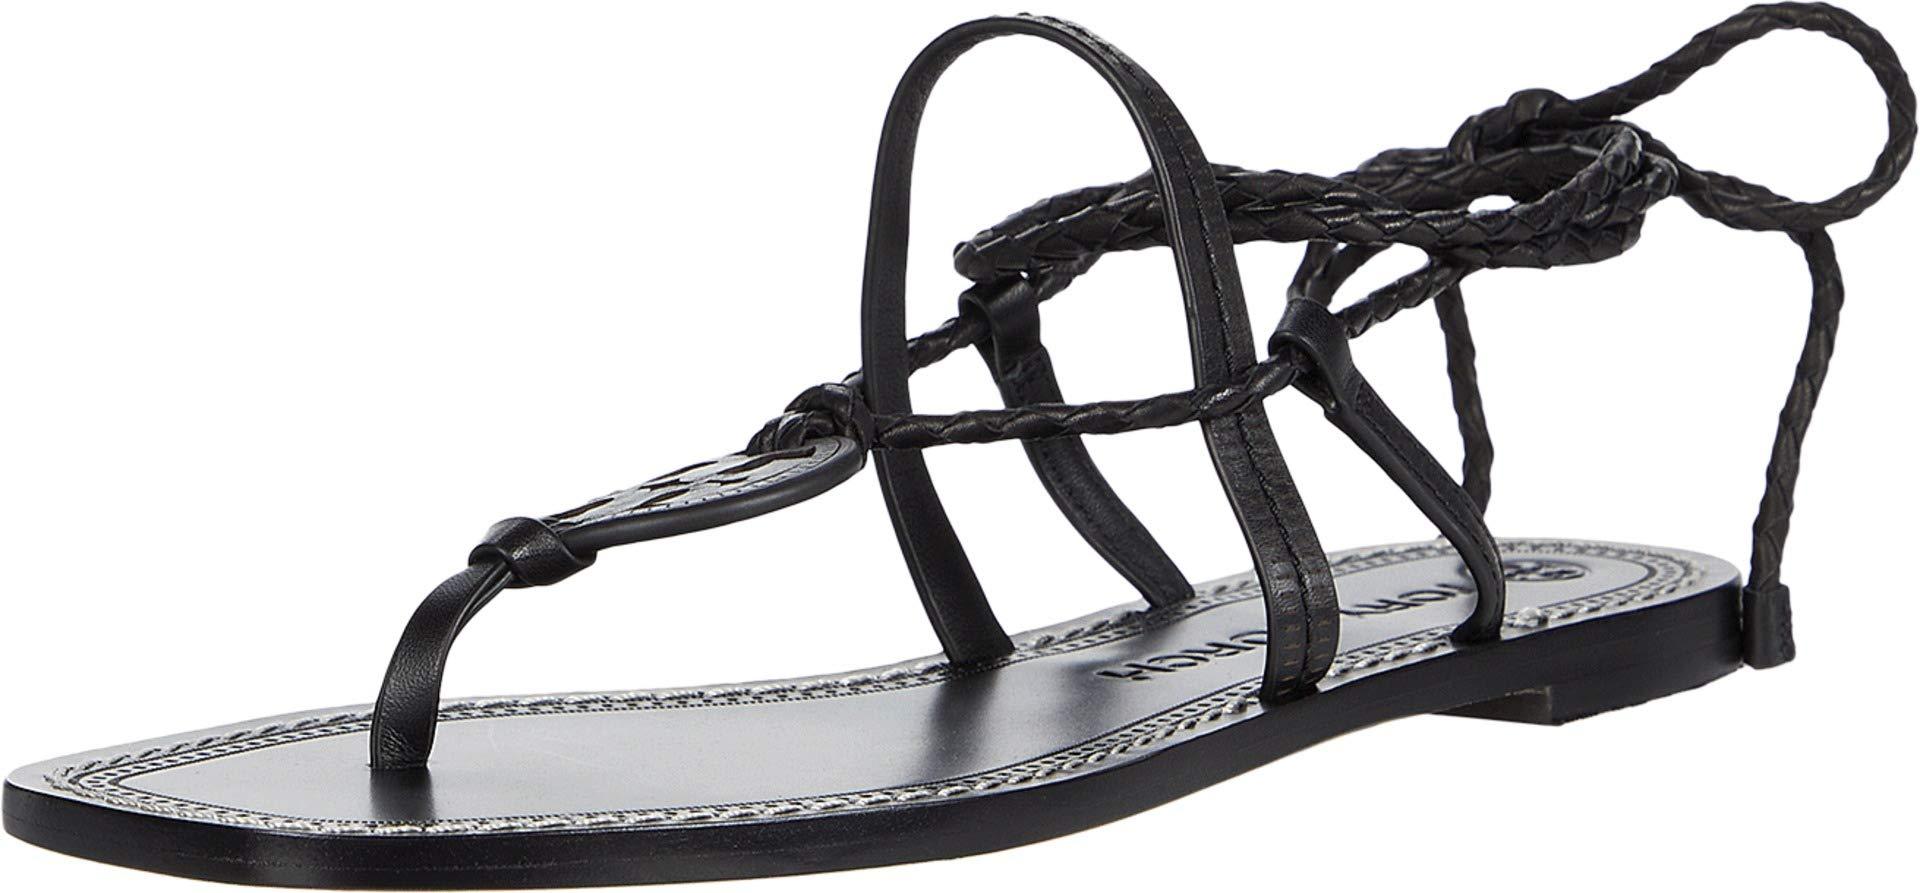 Tory Burch Miller Braided Ankle Tie Logo Sandal in Black - Save 46% - Lyst